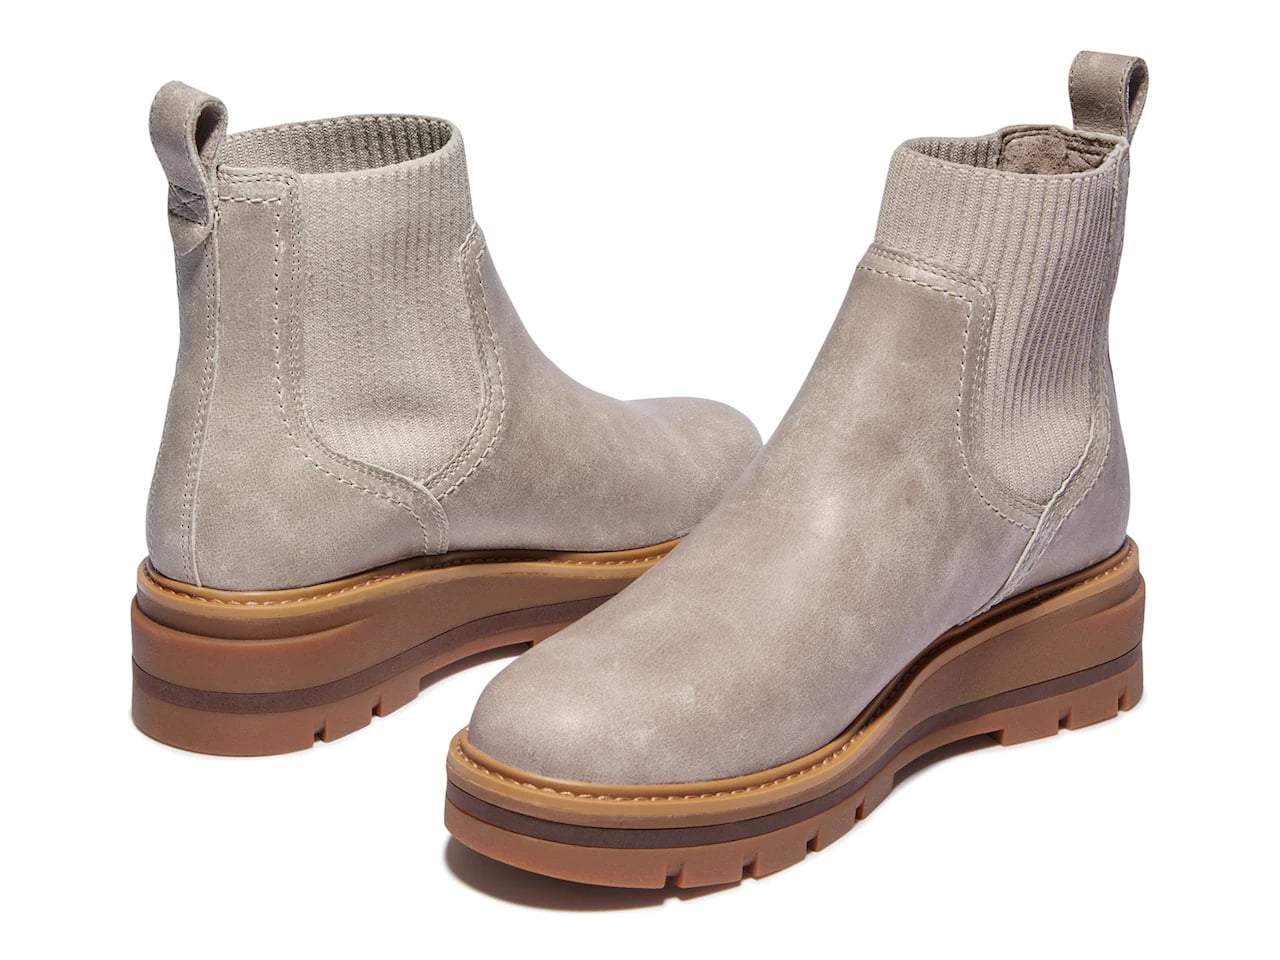 Fashionable chelsea boots of the new season, designer_sneakers provides the  best luxury womens boots…